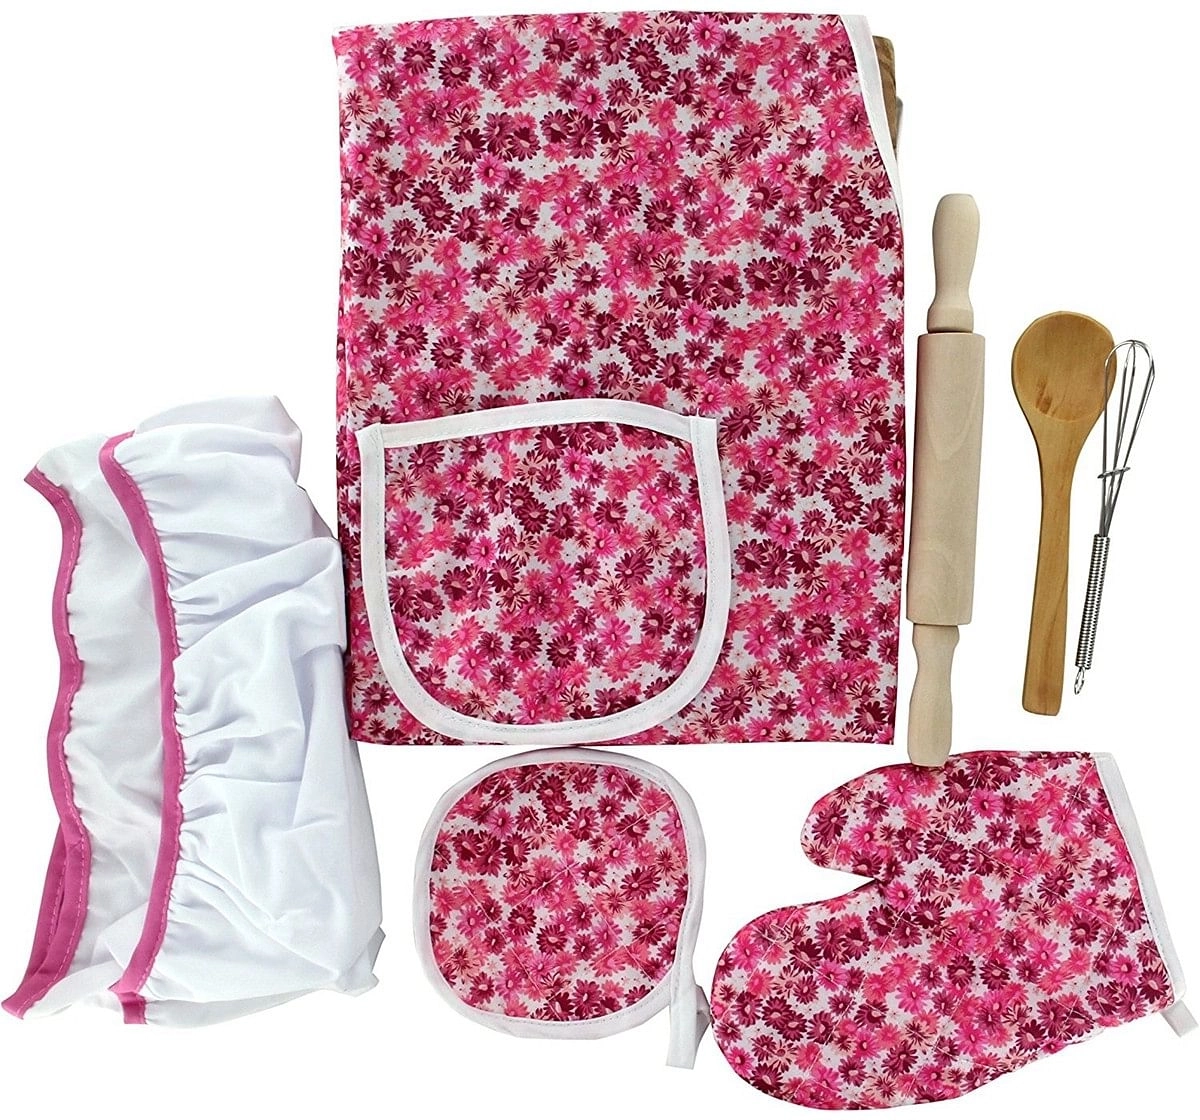 Comdaq Deluxe Chef Set for age 3Y+ (White/Pink) 